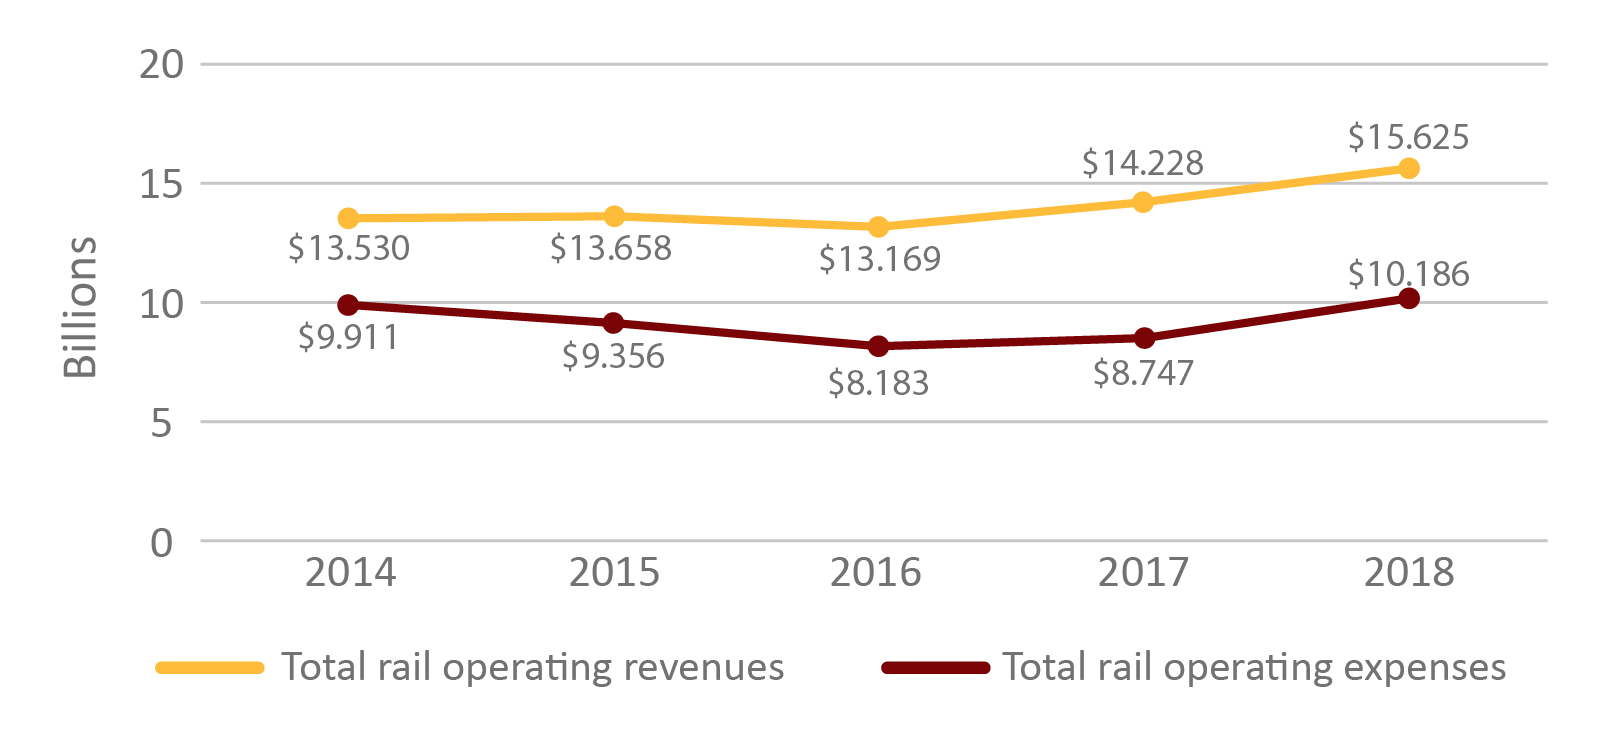 Figure 7: Operating revenues and expenses, mainline railway companies